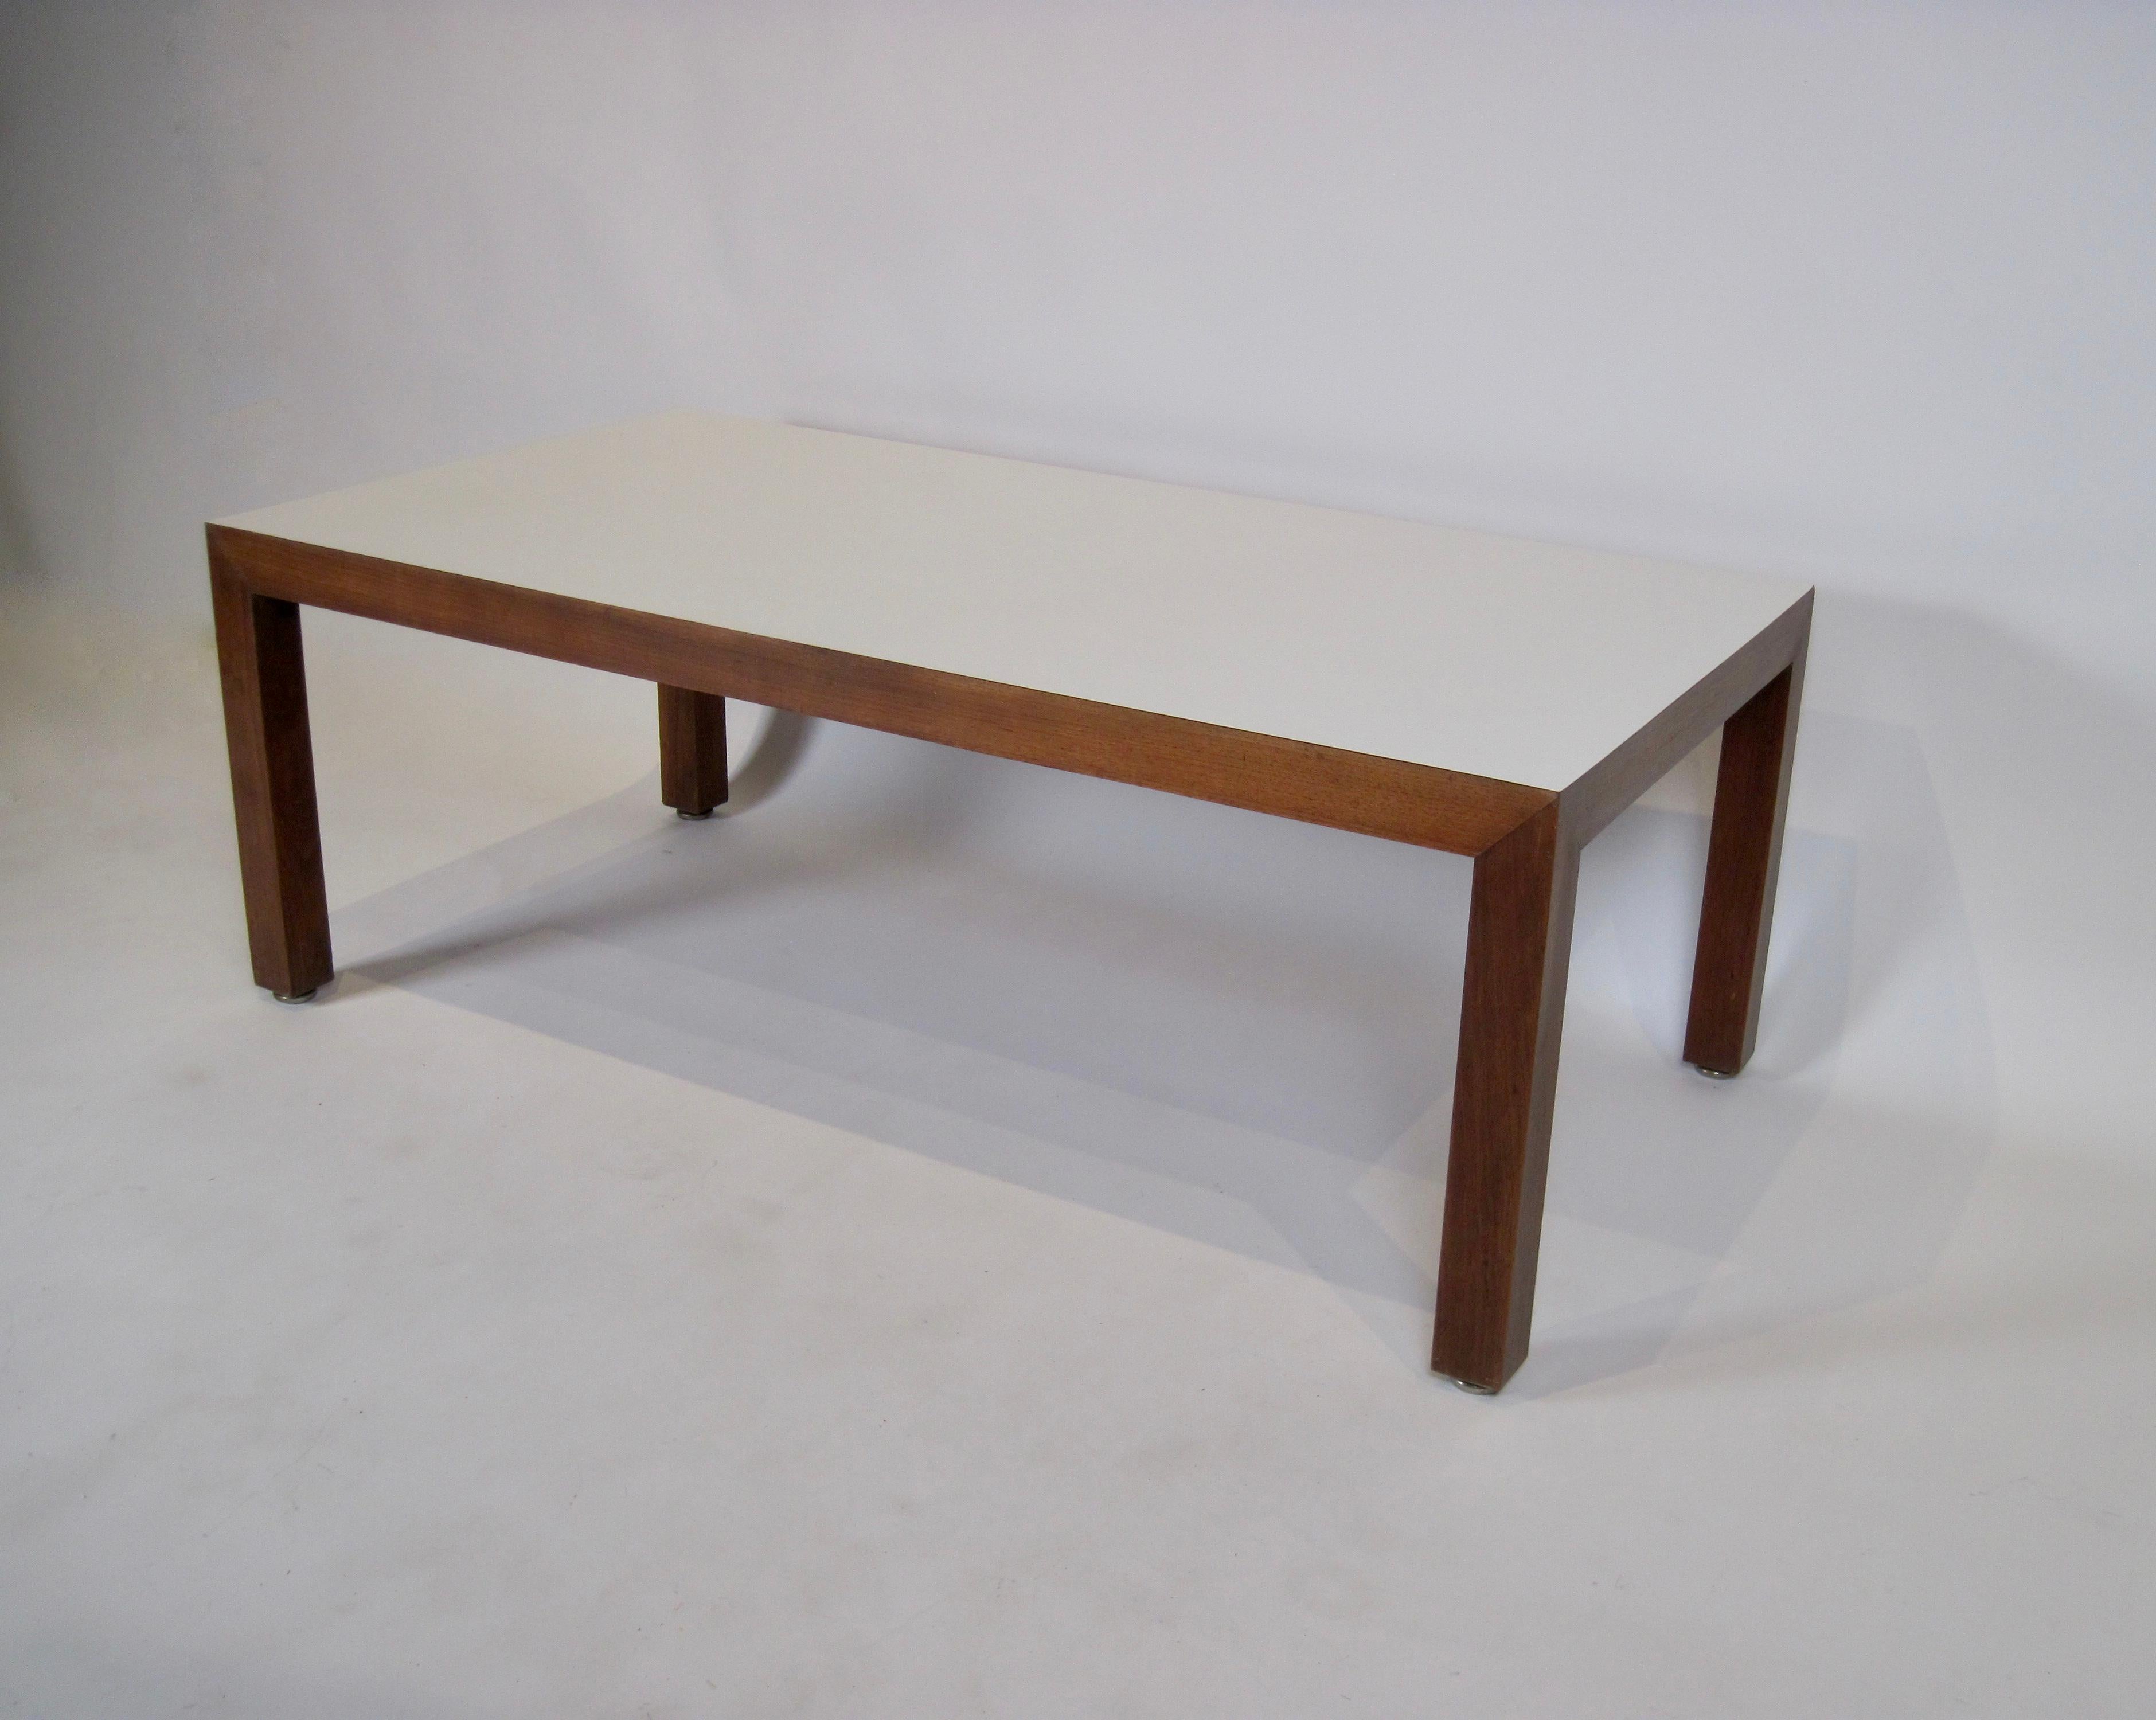 20th Century 1960s Rectangular Wood Coffee Table with White Formica Laminate Top For Sale